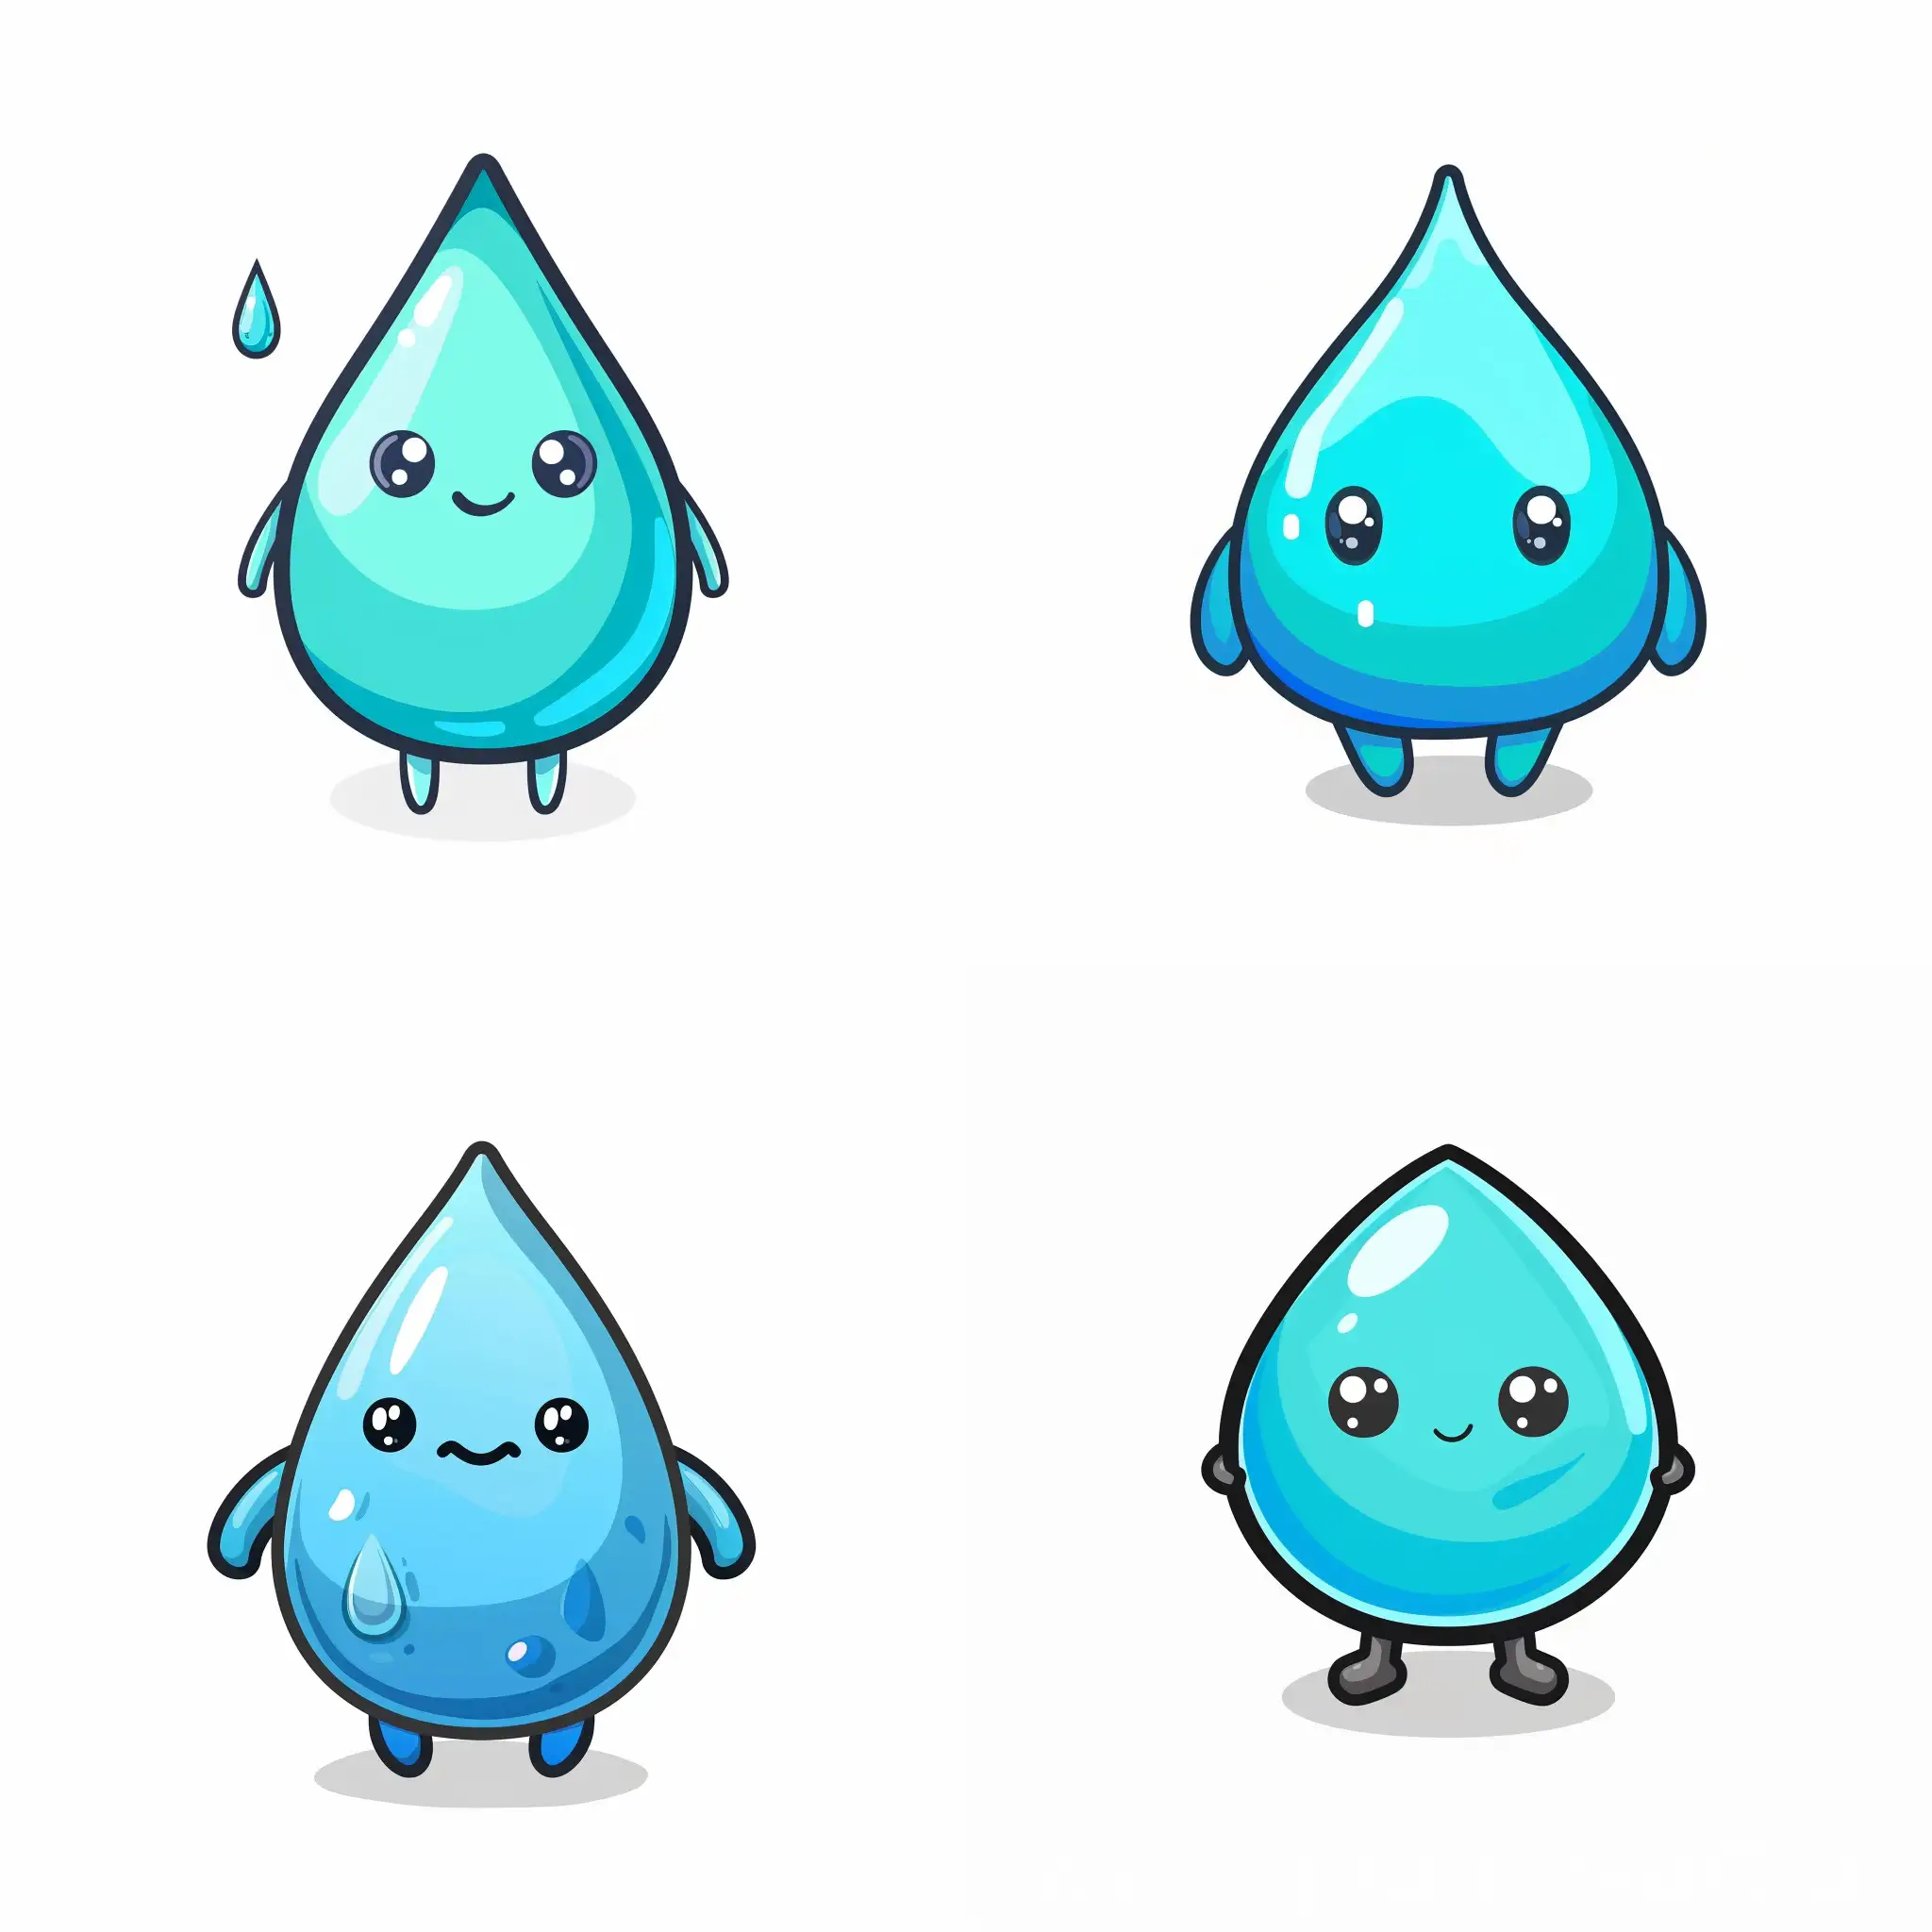 Adorable-Blue-Drop-Mascot-Character-in-Cartoon-Style